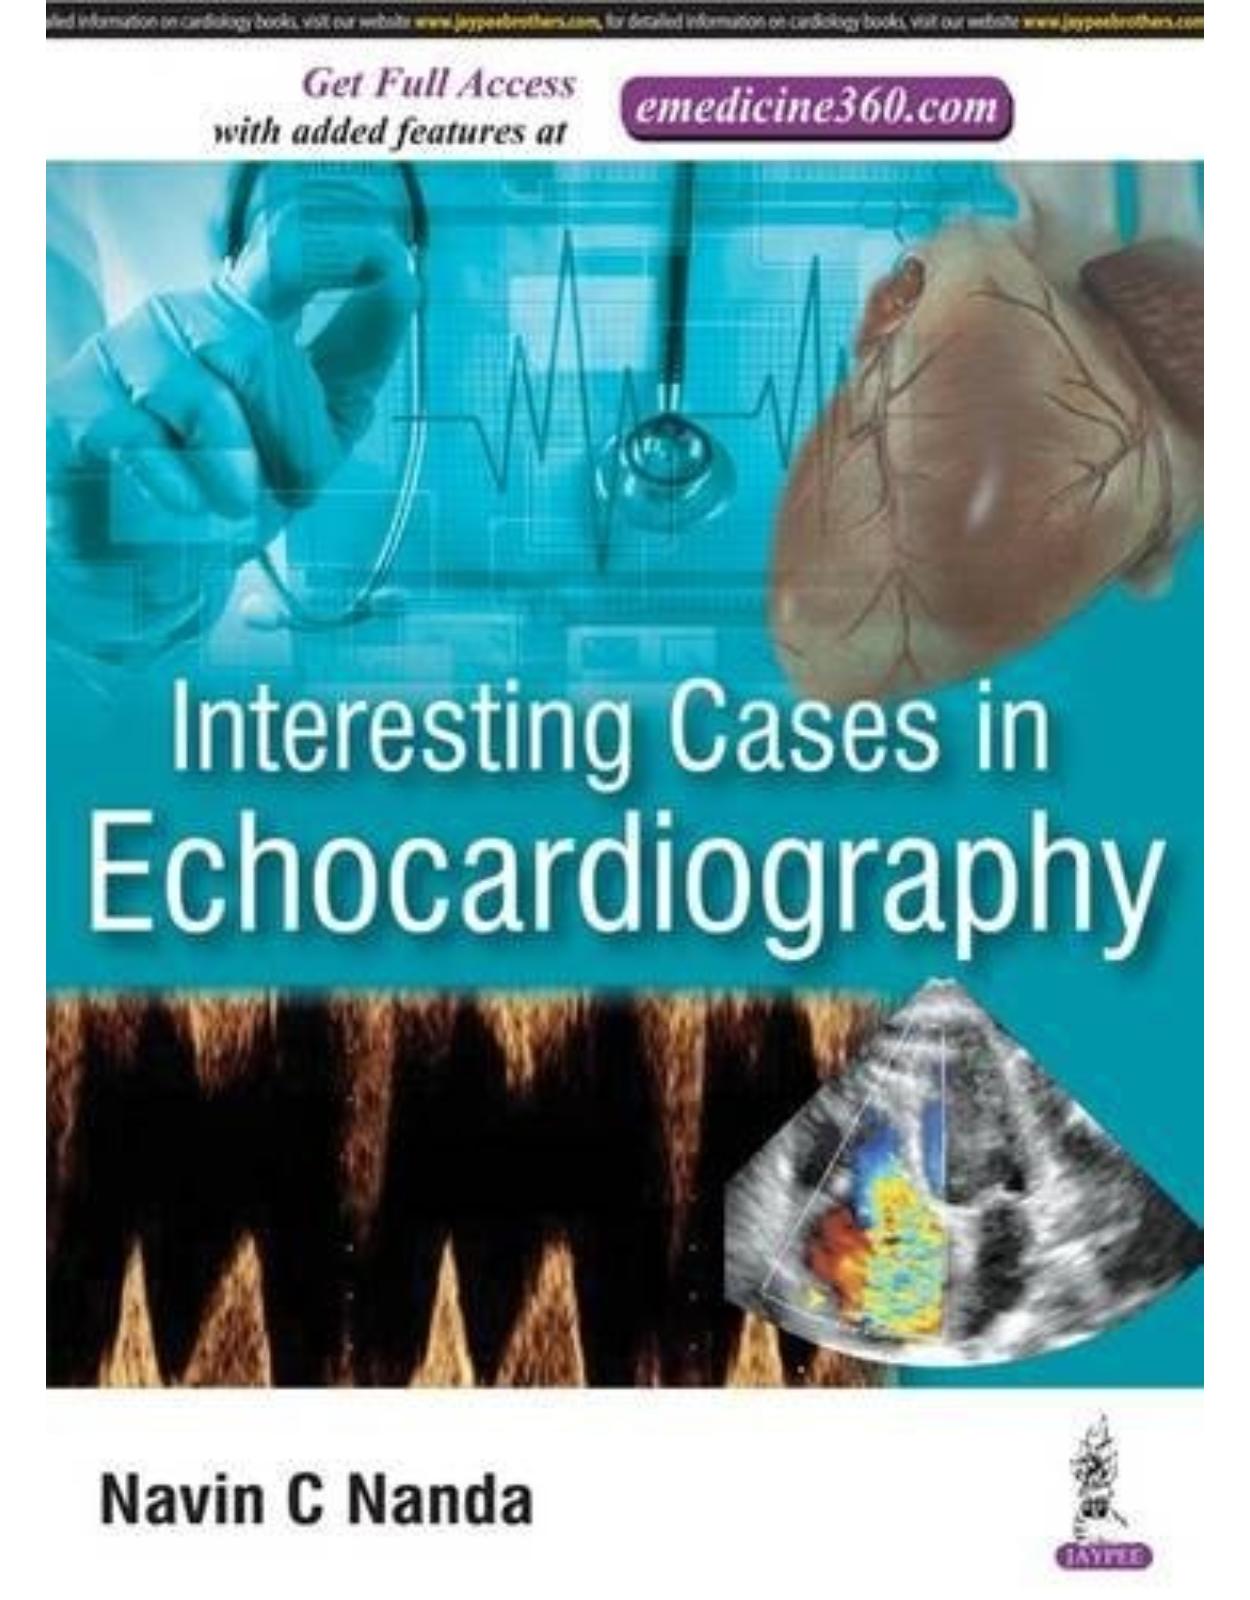 Interesting Cases in Echocardiography